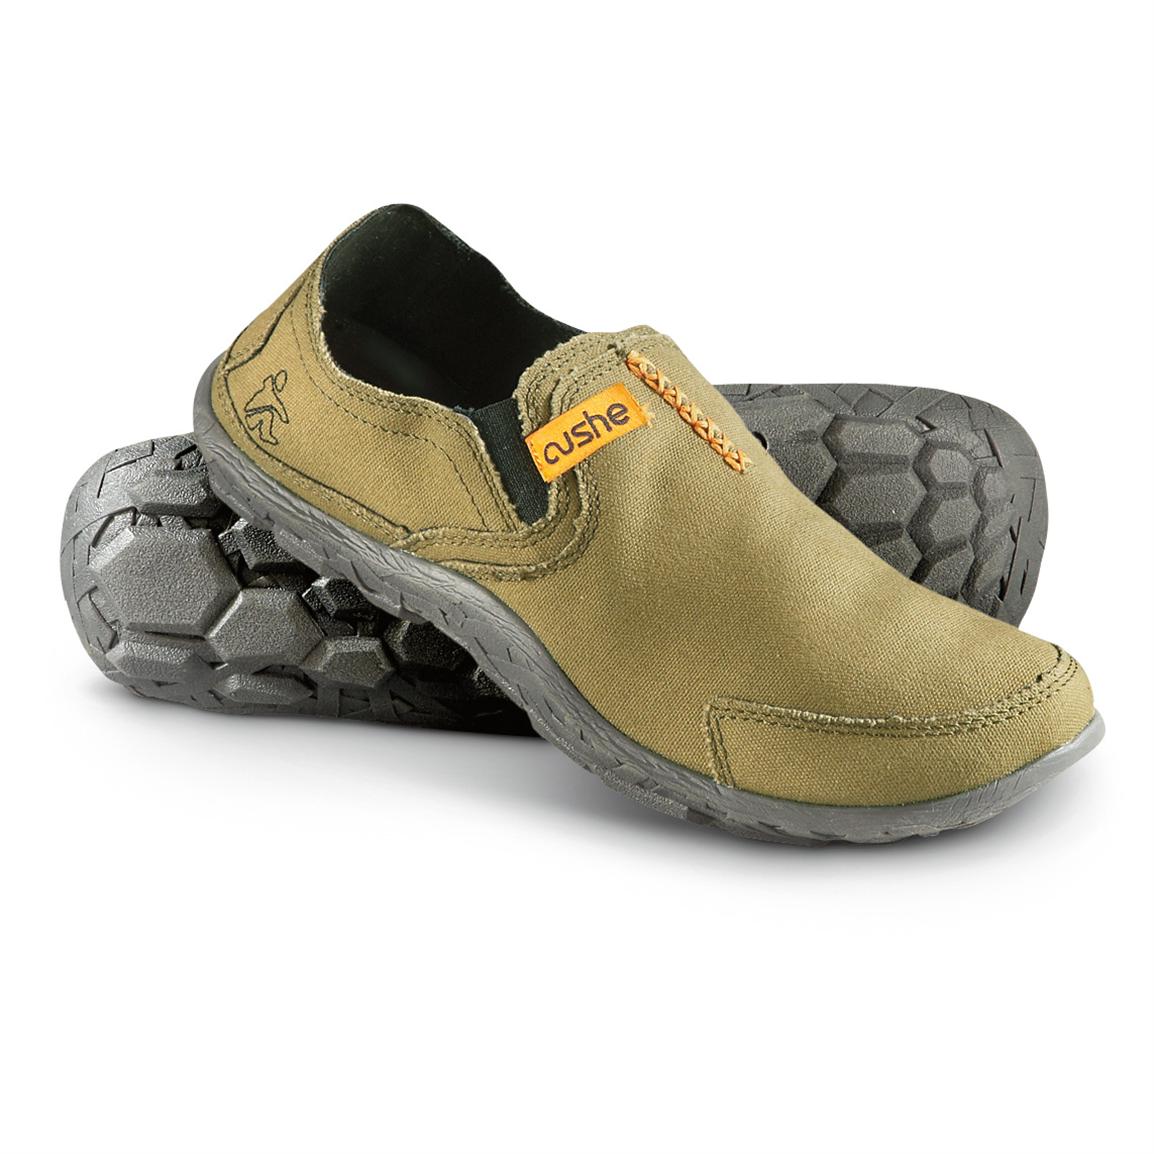 Men's Cushe Mocs - 579313, Casual Shoes at Sportsman's Guide